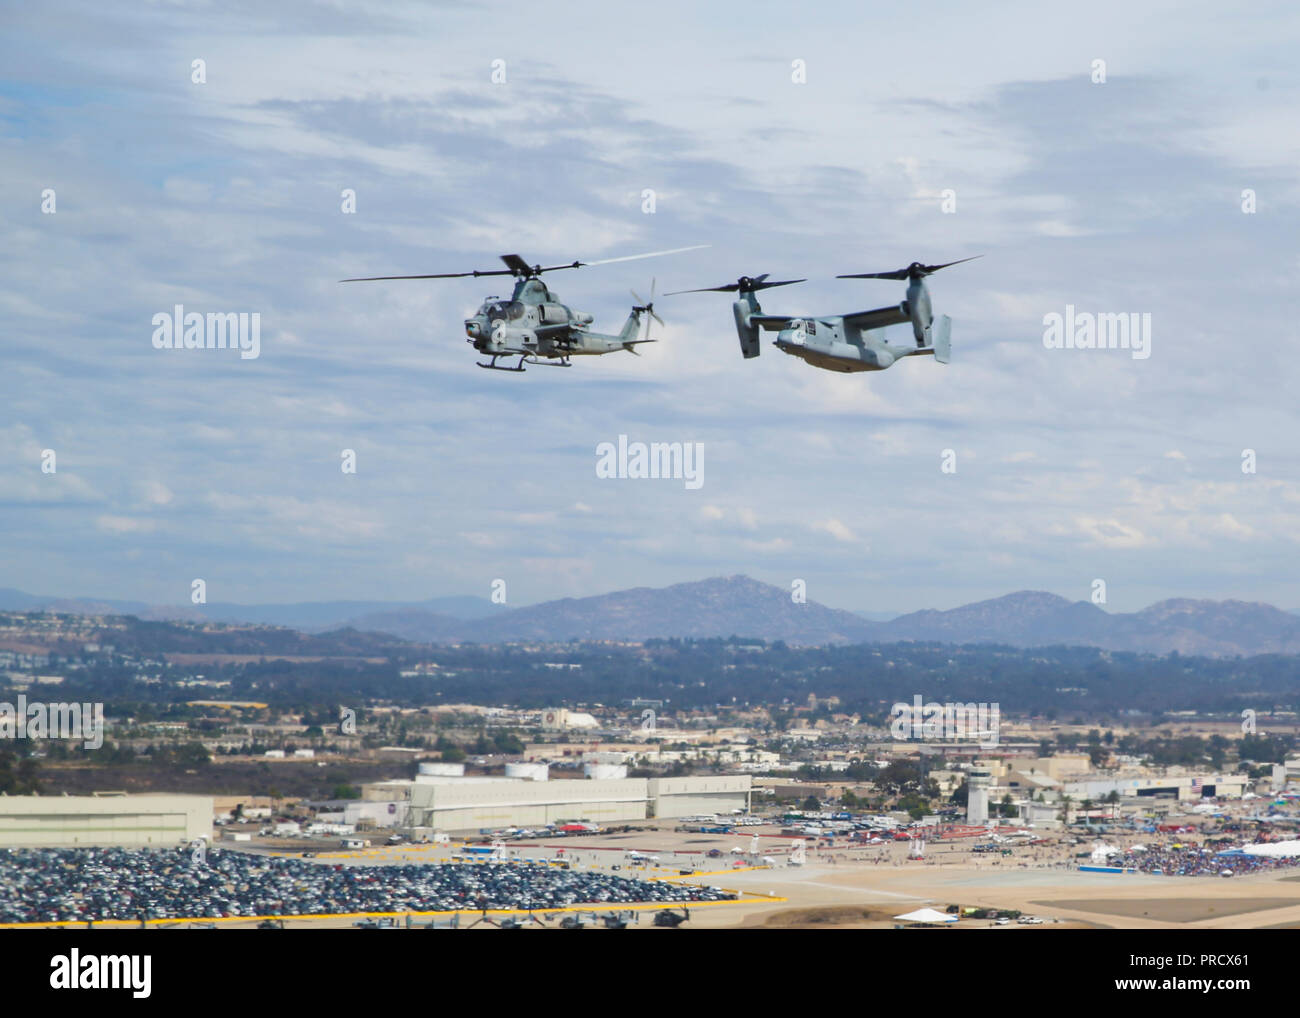 an AH-1Z Viper, left, alongside an MV-22B Osprey, right, fly high during the Marine Air Ground Task Force demonstration at the 2018 Marine Corps Air Station Miramar Air Show on MCAS Miramar, Calif., Sept. 30.This year's air show honors '100 years of women in the Marine Corps' featuring several performances and displays that highlights the accomplishments and milestones women have made since the first female enlistee, Opha May Johnson, Who joined the service in 1918. (U.S. Marine Corps photo by Lance Cpl. Raynaldo D. Ramos) Stock Photo